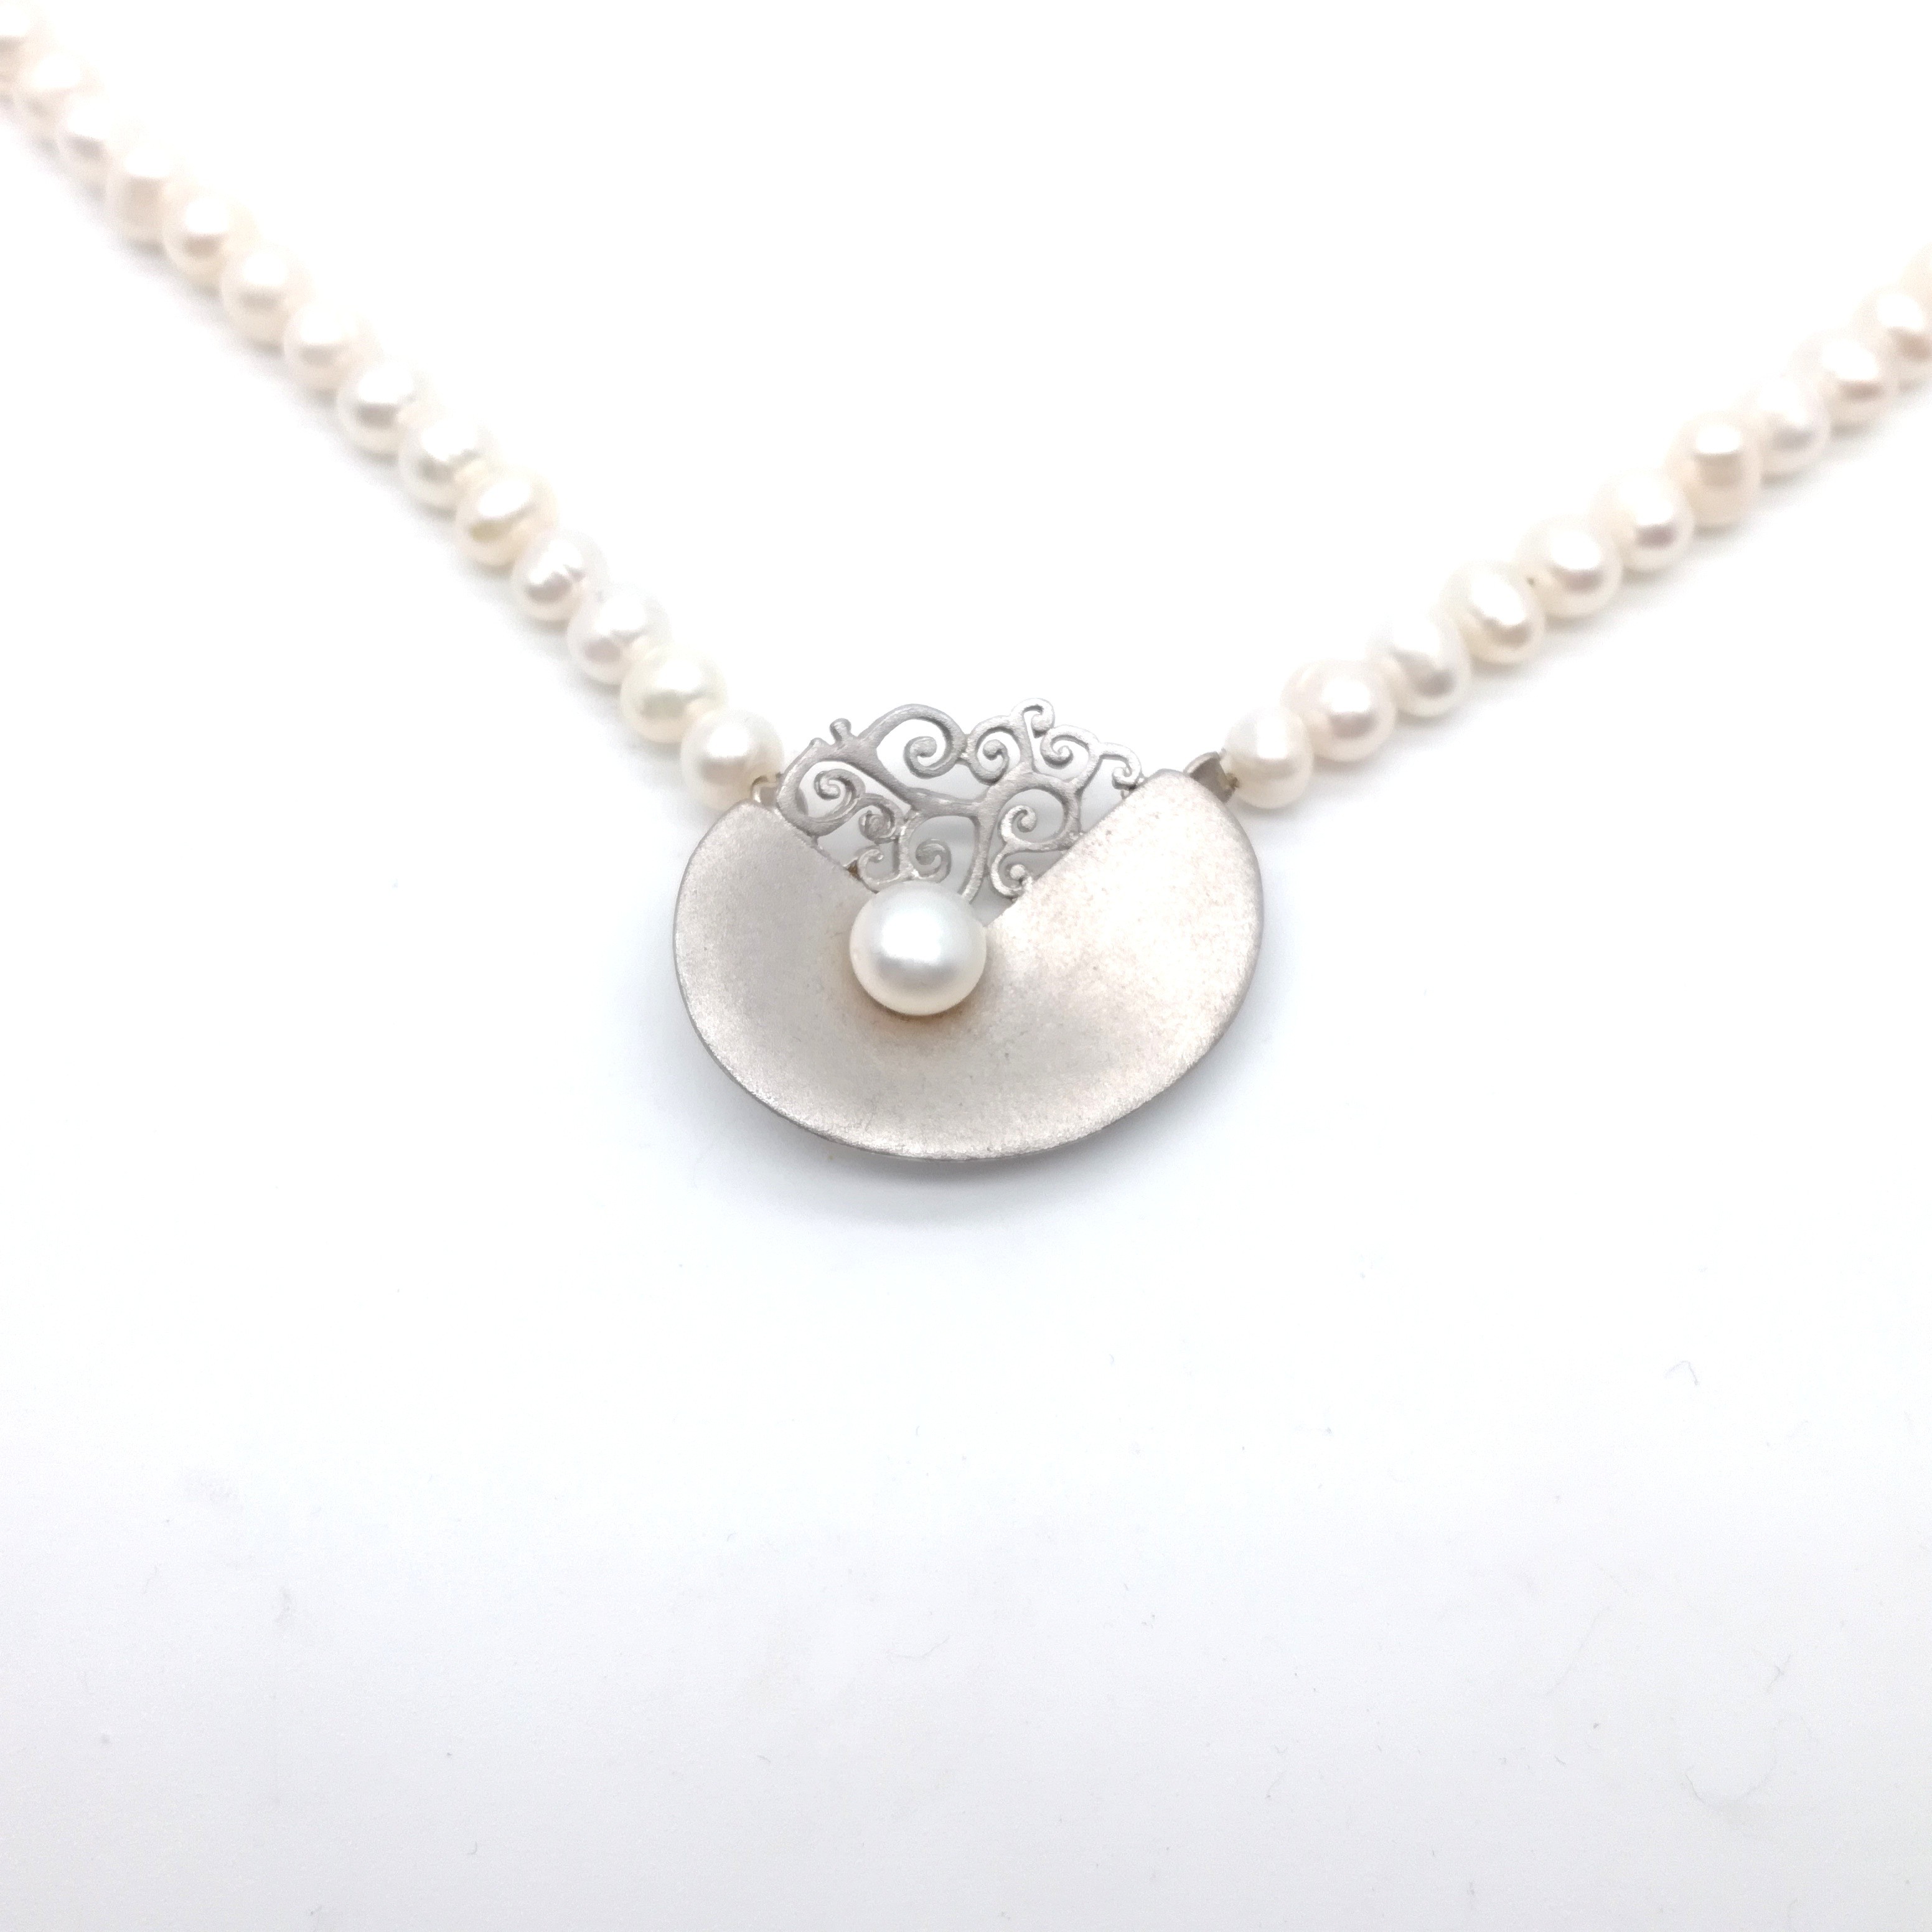 Silver necklace 925 gold plated with pearl 